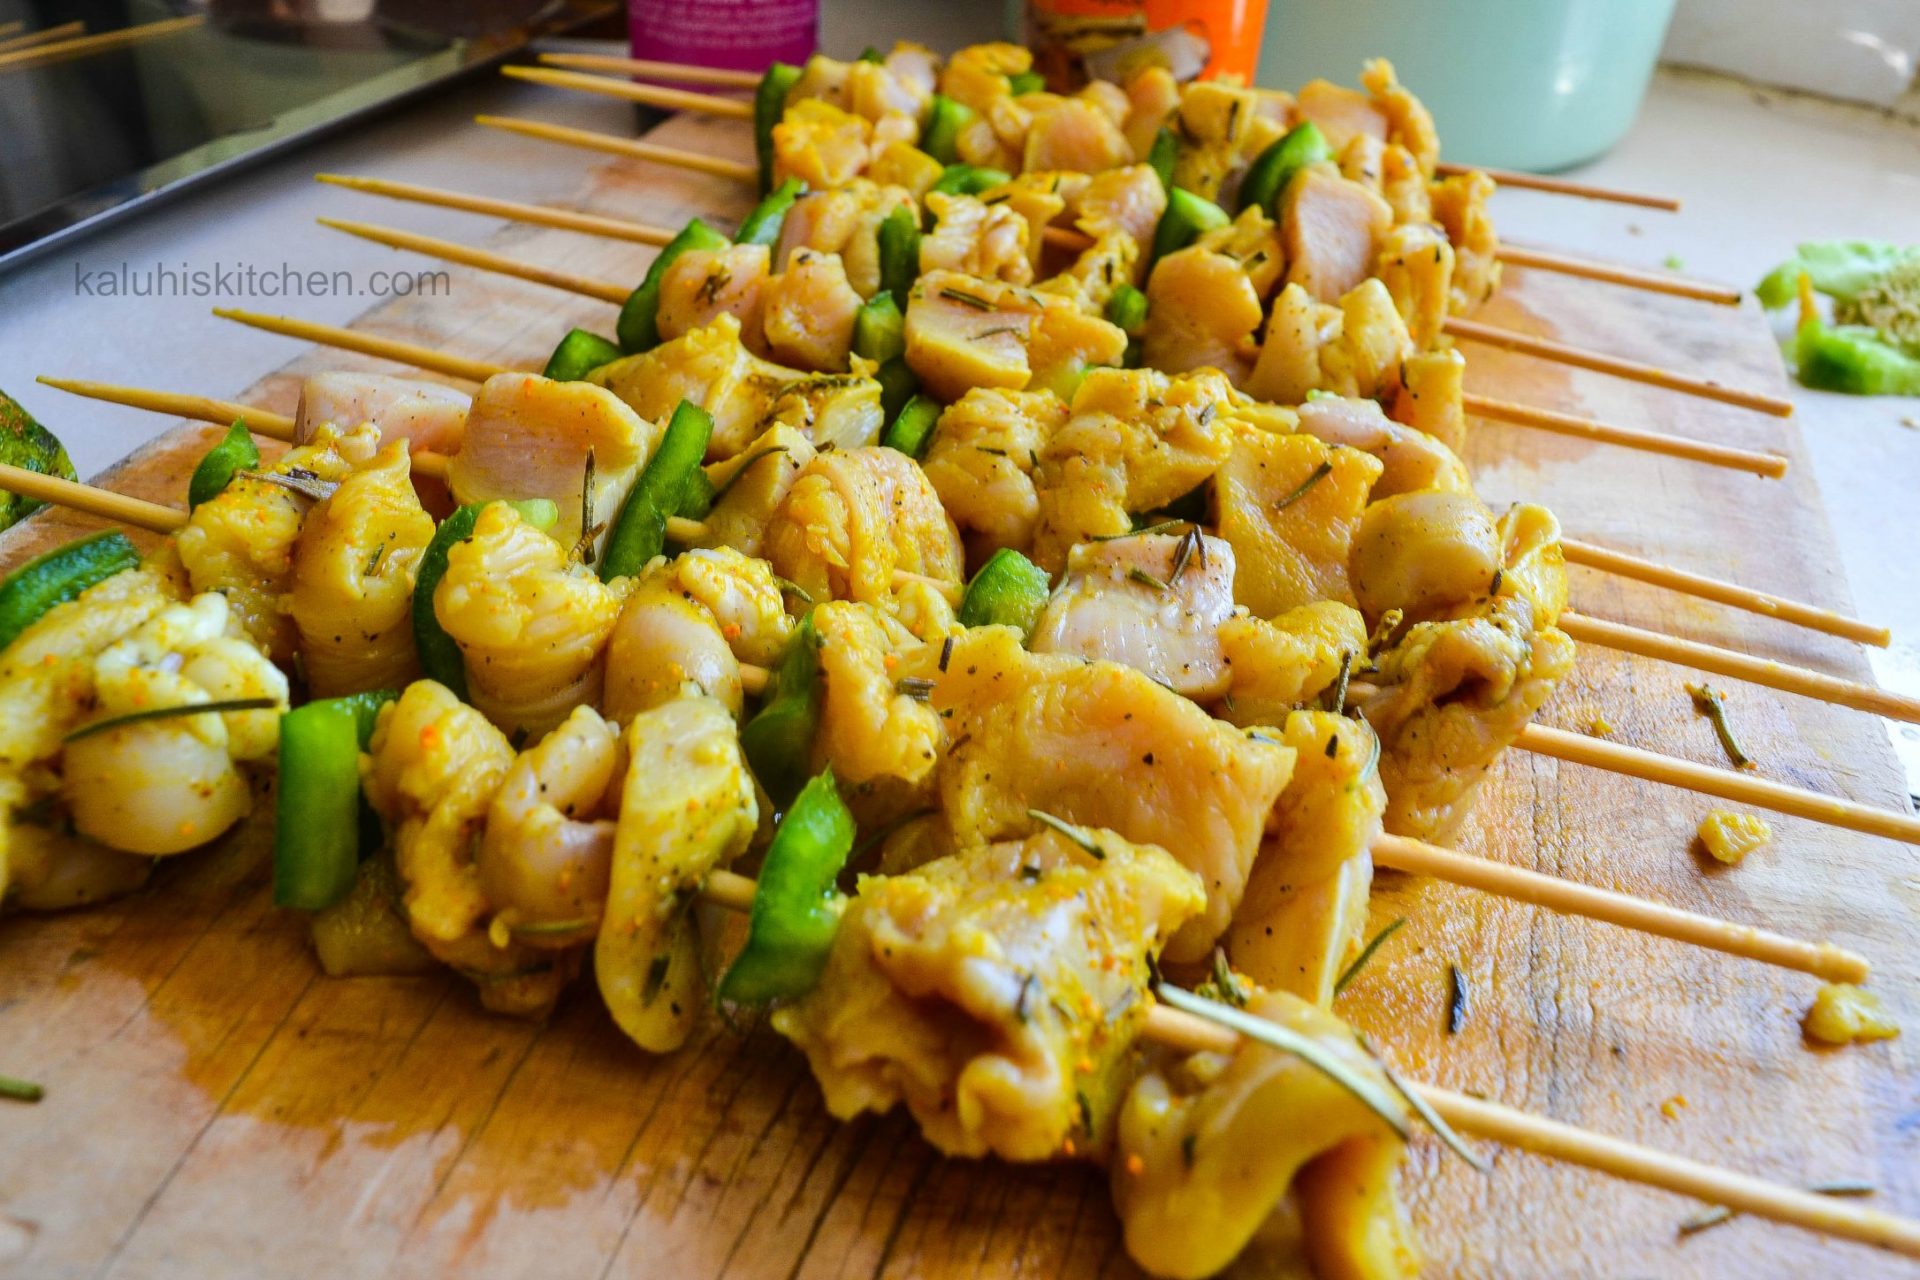 chicken chunks with rosemary and black pepper and turmeric skewered with green bell pepper for the mshikaki_kenyan food_kaluhiskitchen.com